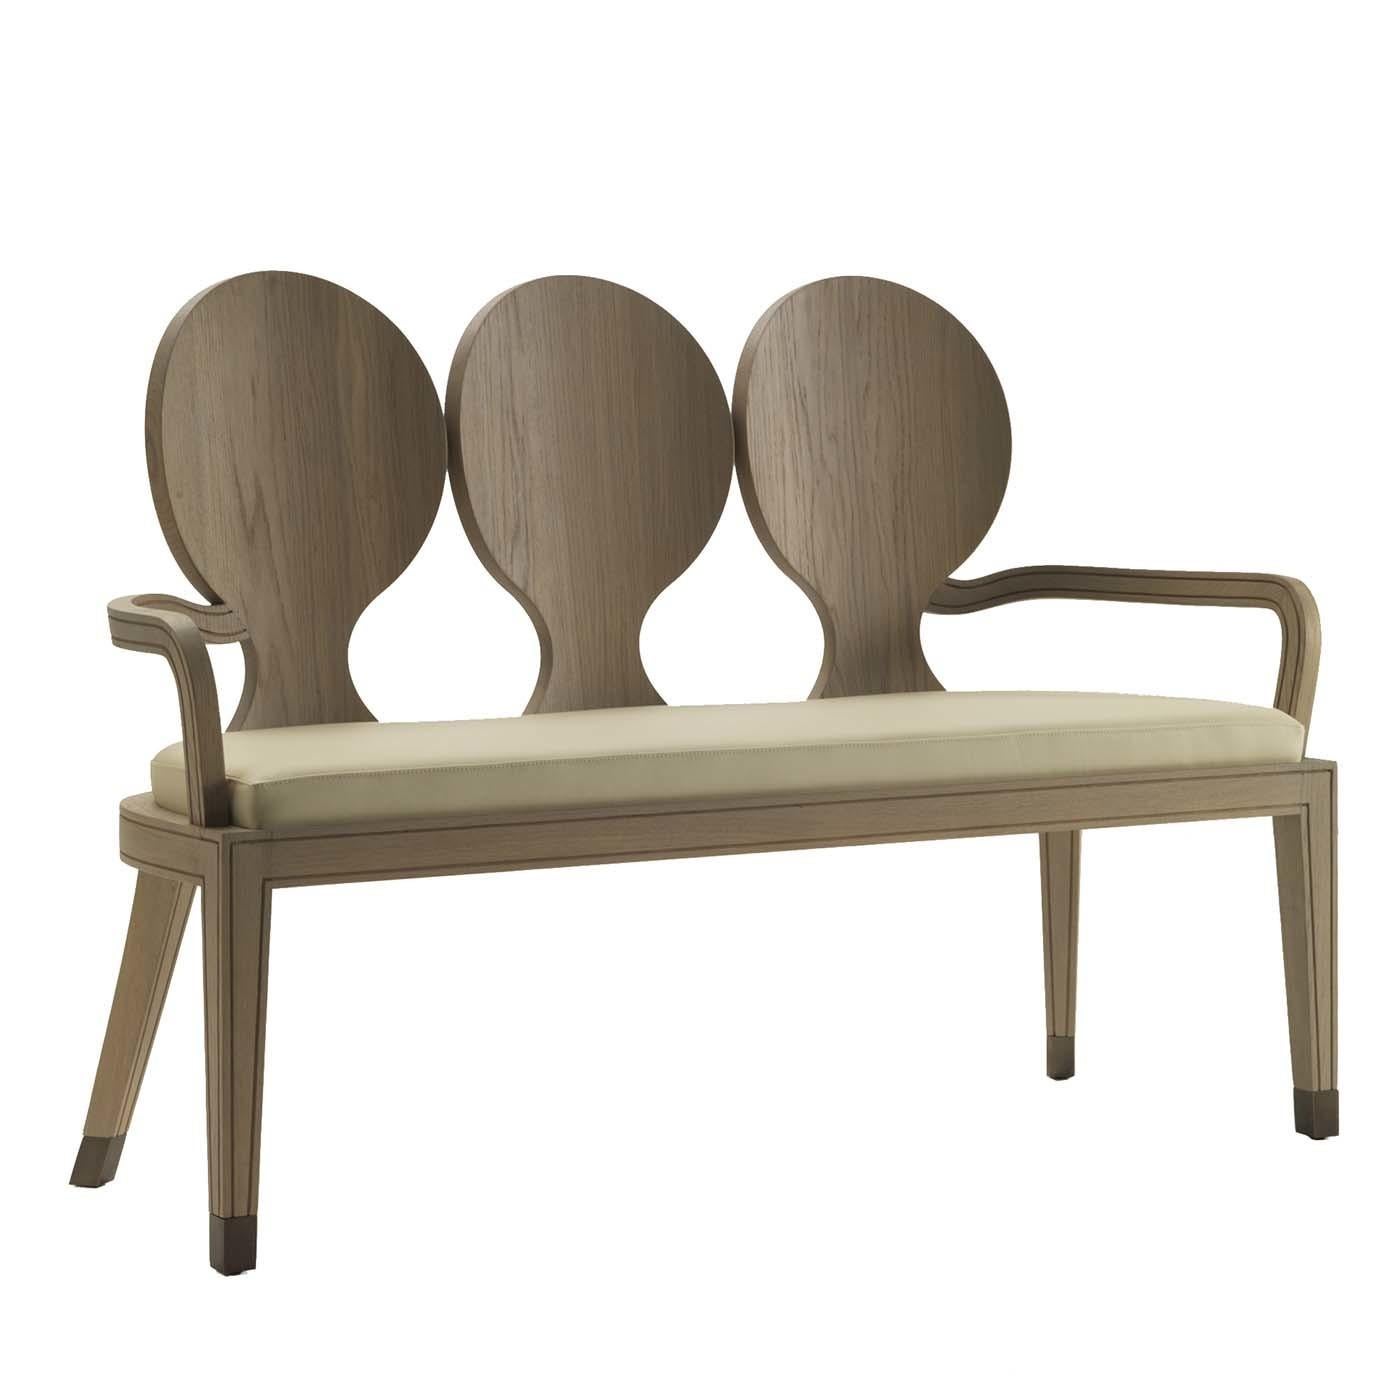 This unique design will enliven both a Classic and a contemporary interior. The ideal accent piece for an entryway, this three-seat bench was crafted of wood with a finish in natural oak and features saber-shaped back legs and low armrests. The